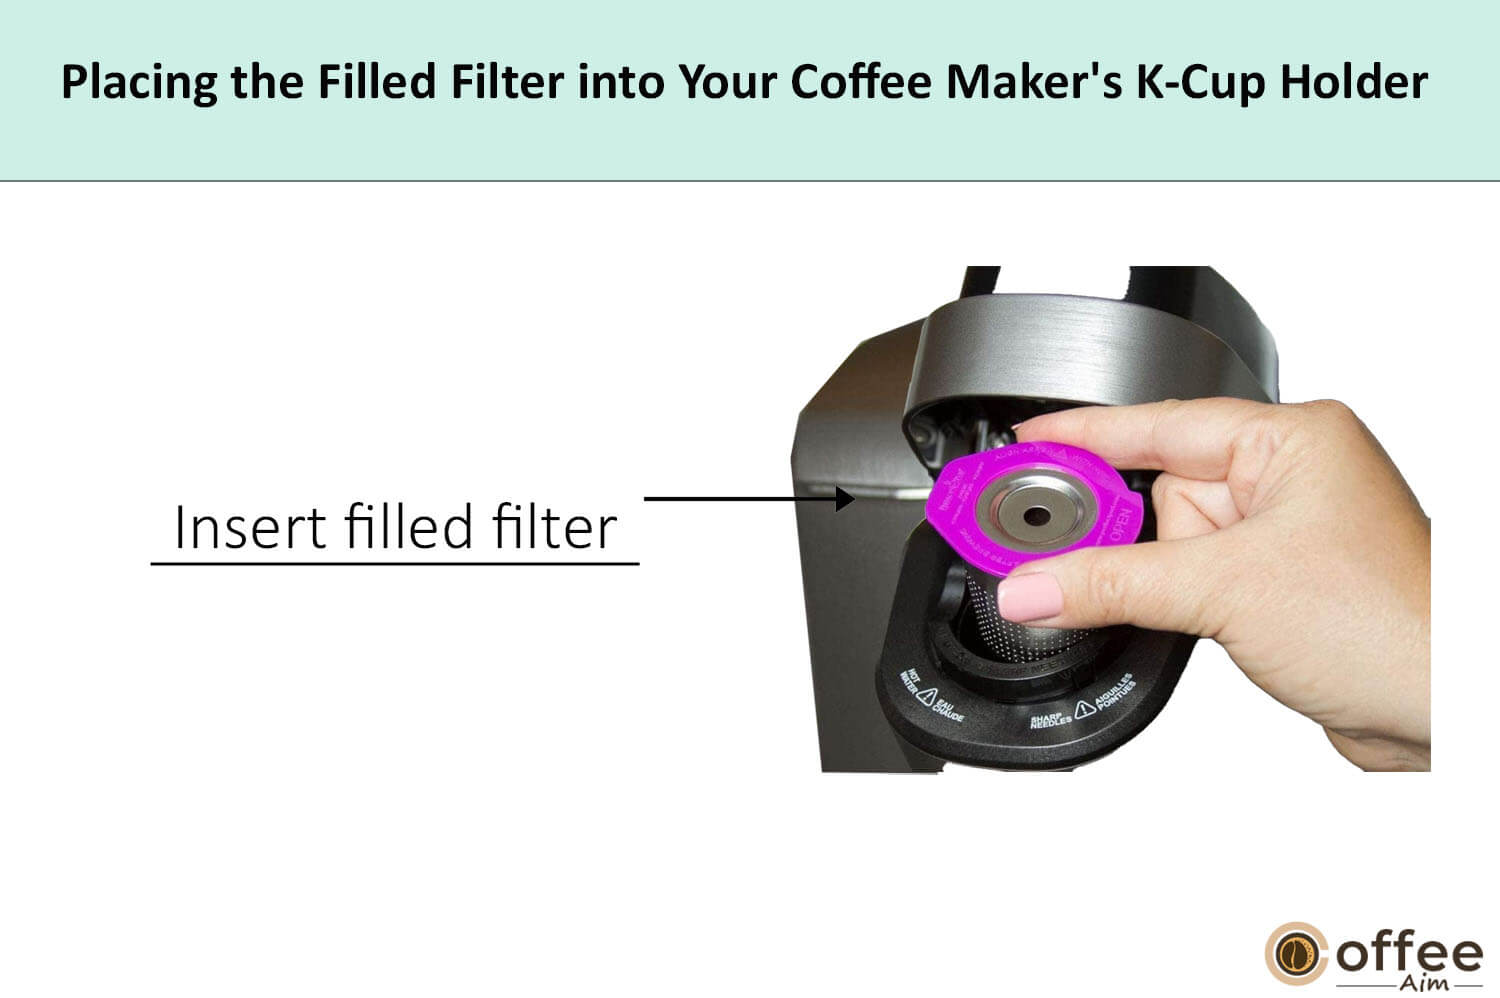 In this image, I elucidate placing the filled filter in coffee maker.